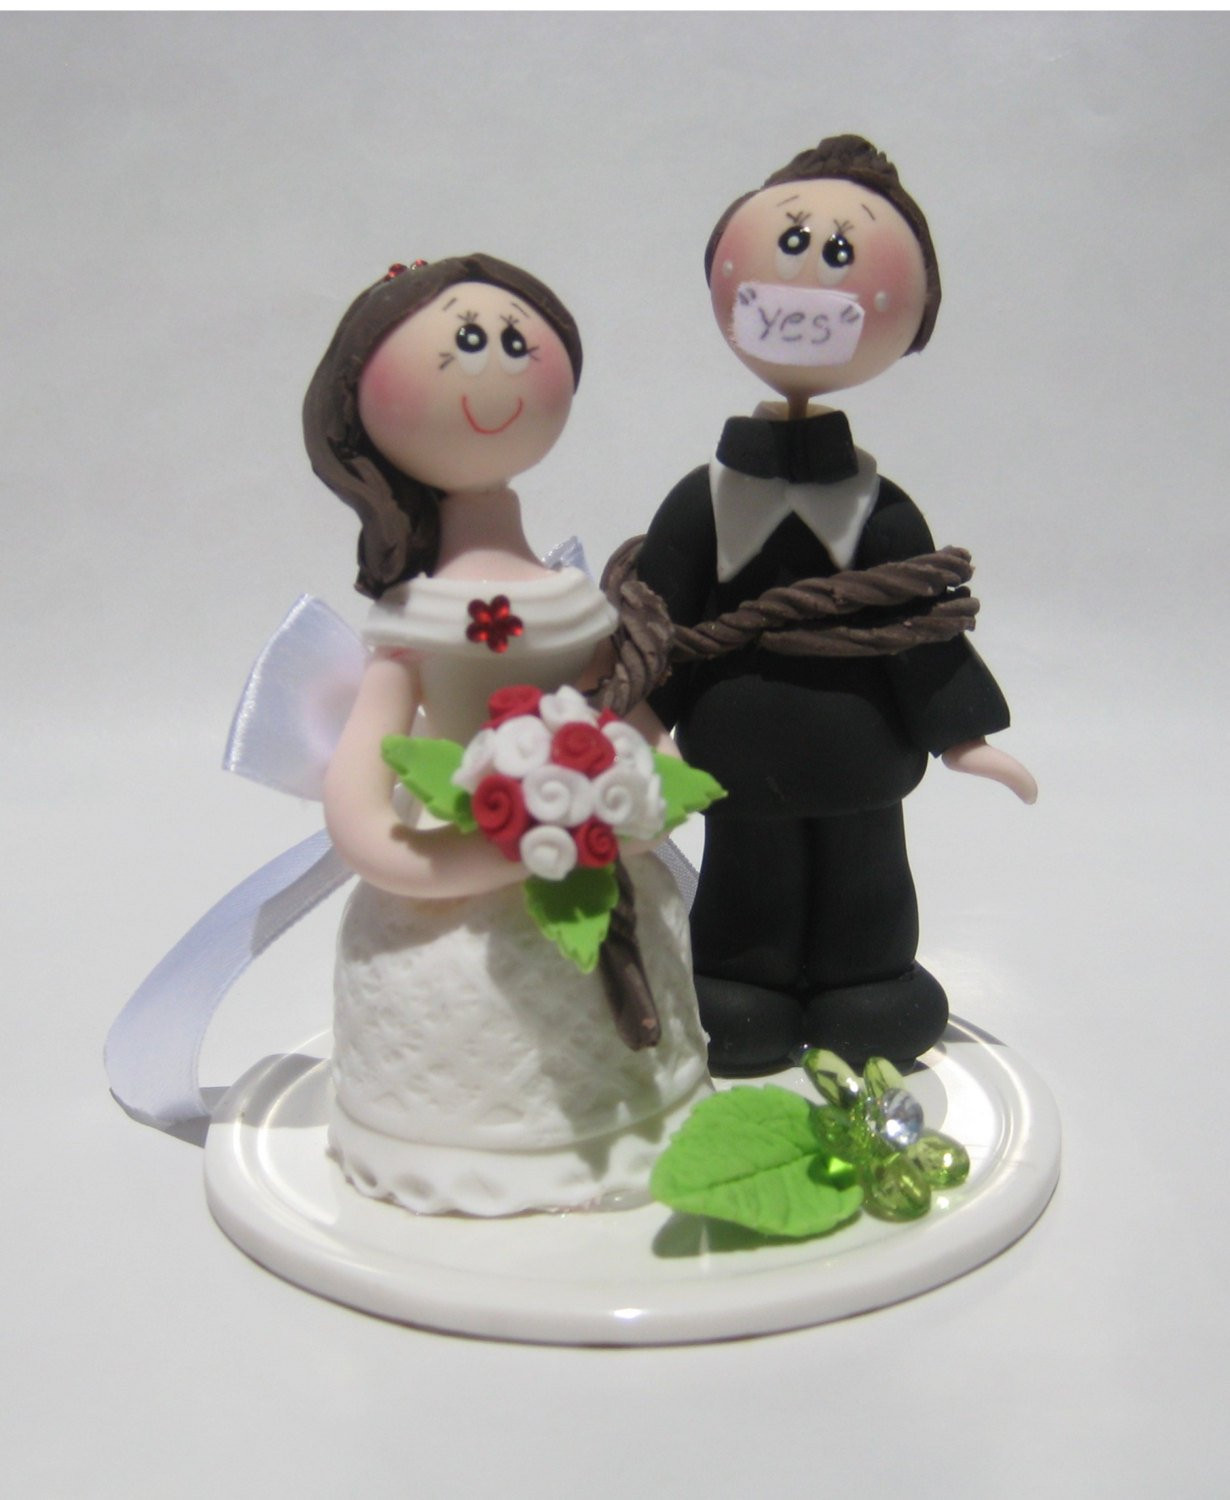 Funny Cake Toppers For Wedding Cakes
 Wedding cake topper funny wedding cake topper cake topper